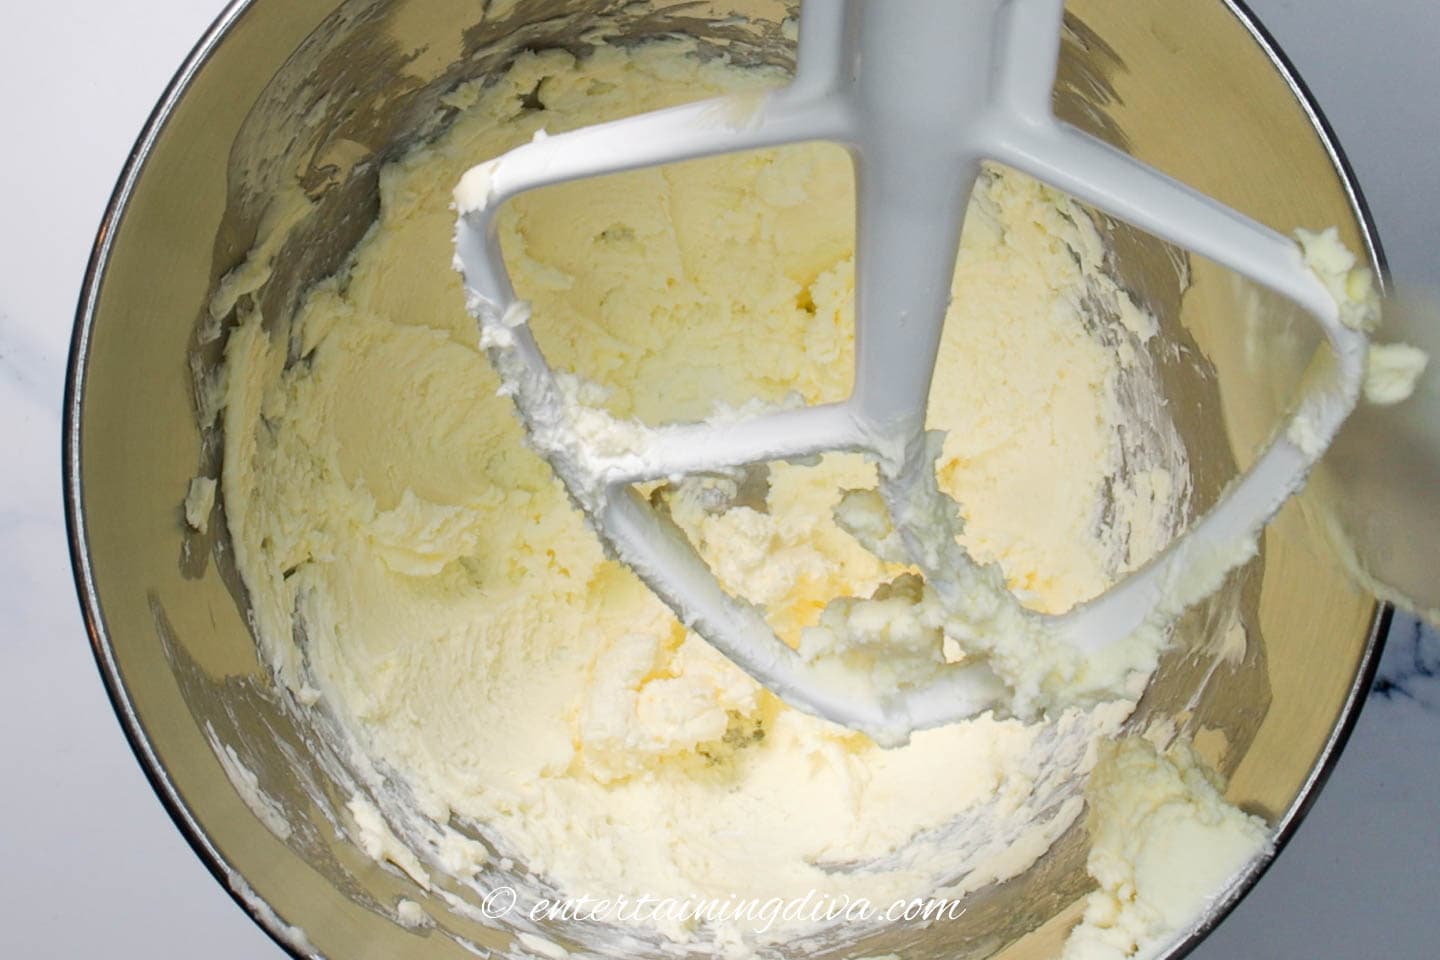 Cream cheese and butter in a mixer bowl